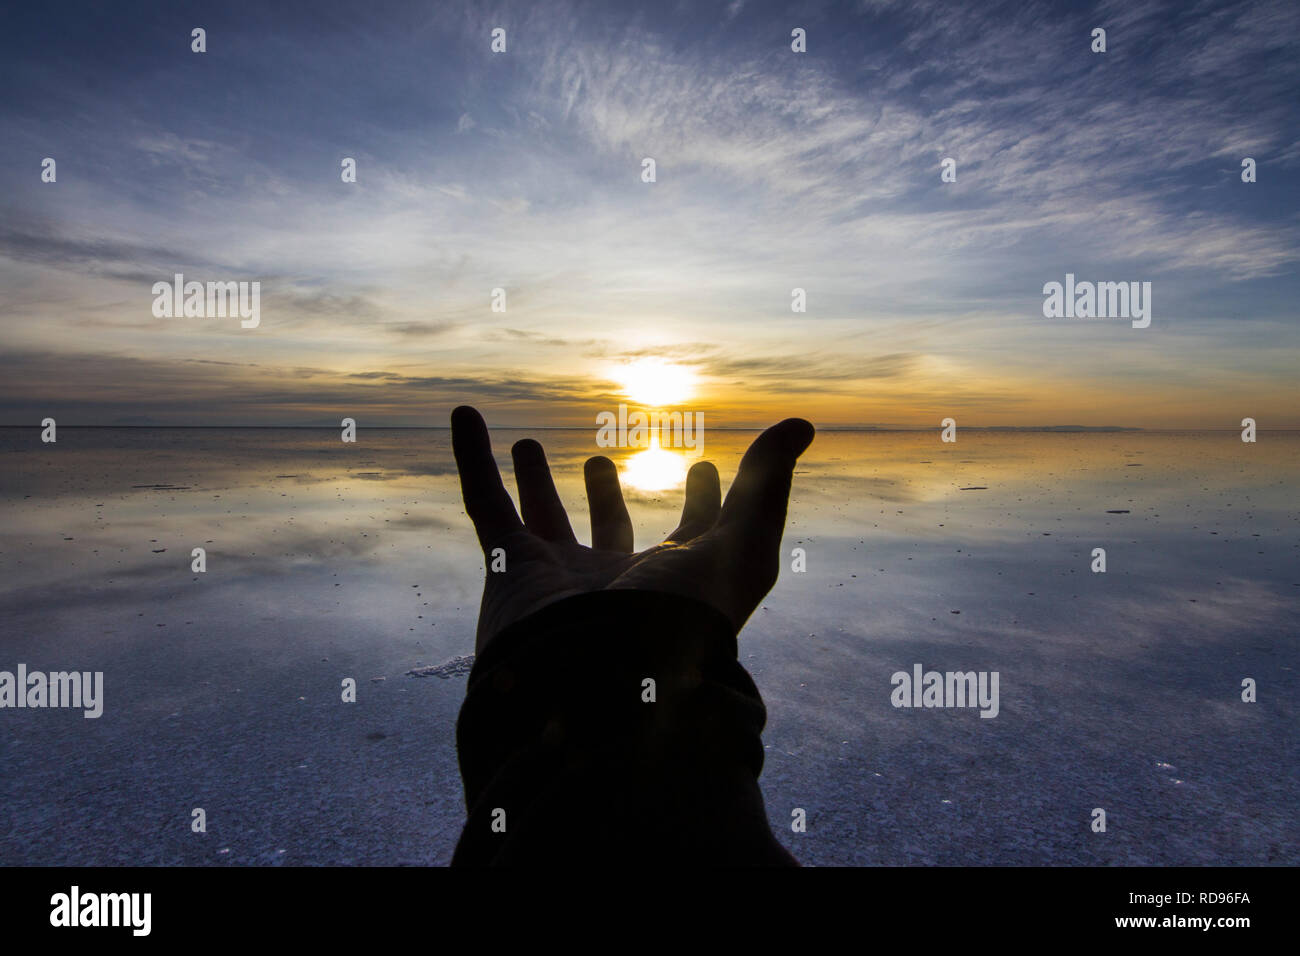 A hand for hope on this amazing Planet Earth.  Trying to catch the sun at Uyuni saltflats inside an idyllic colorful scenery with reflections in water Stock Photo